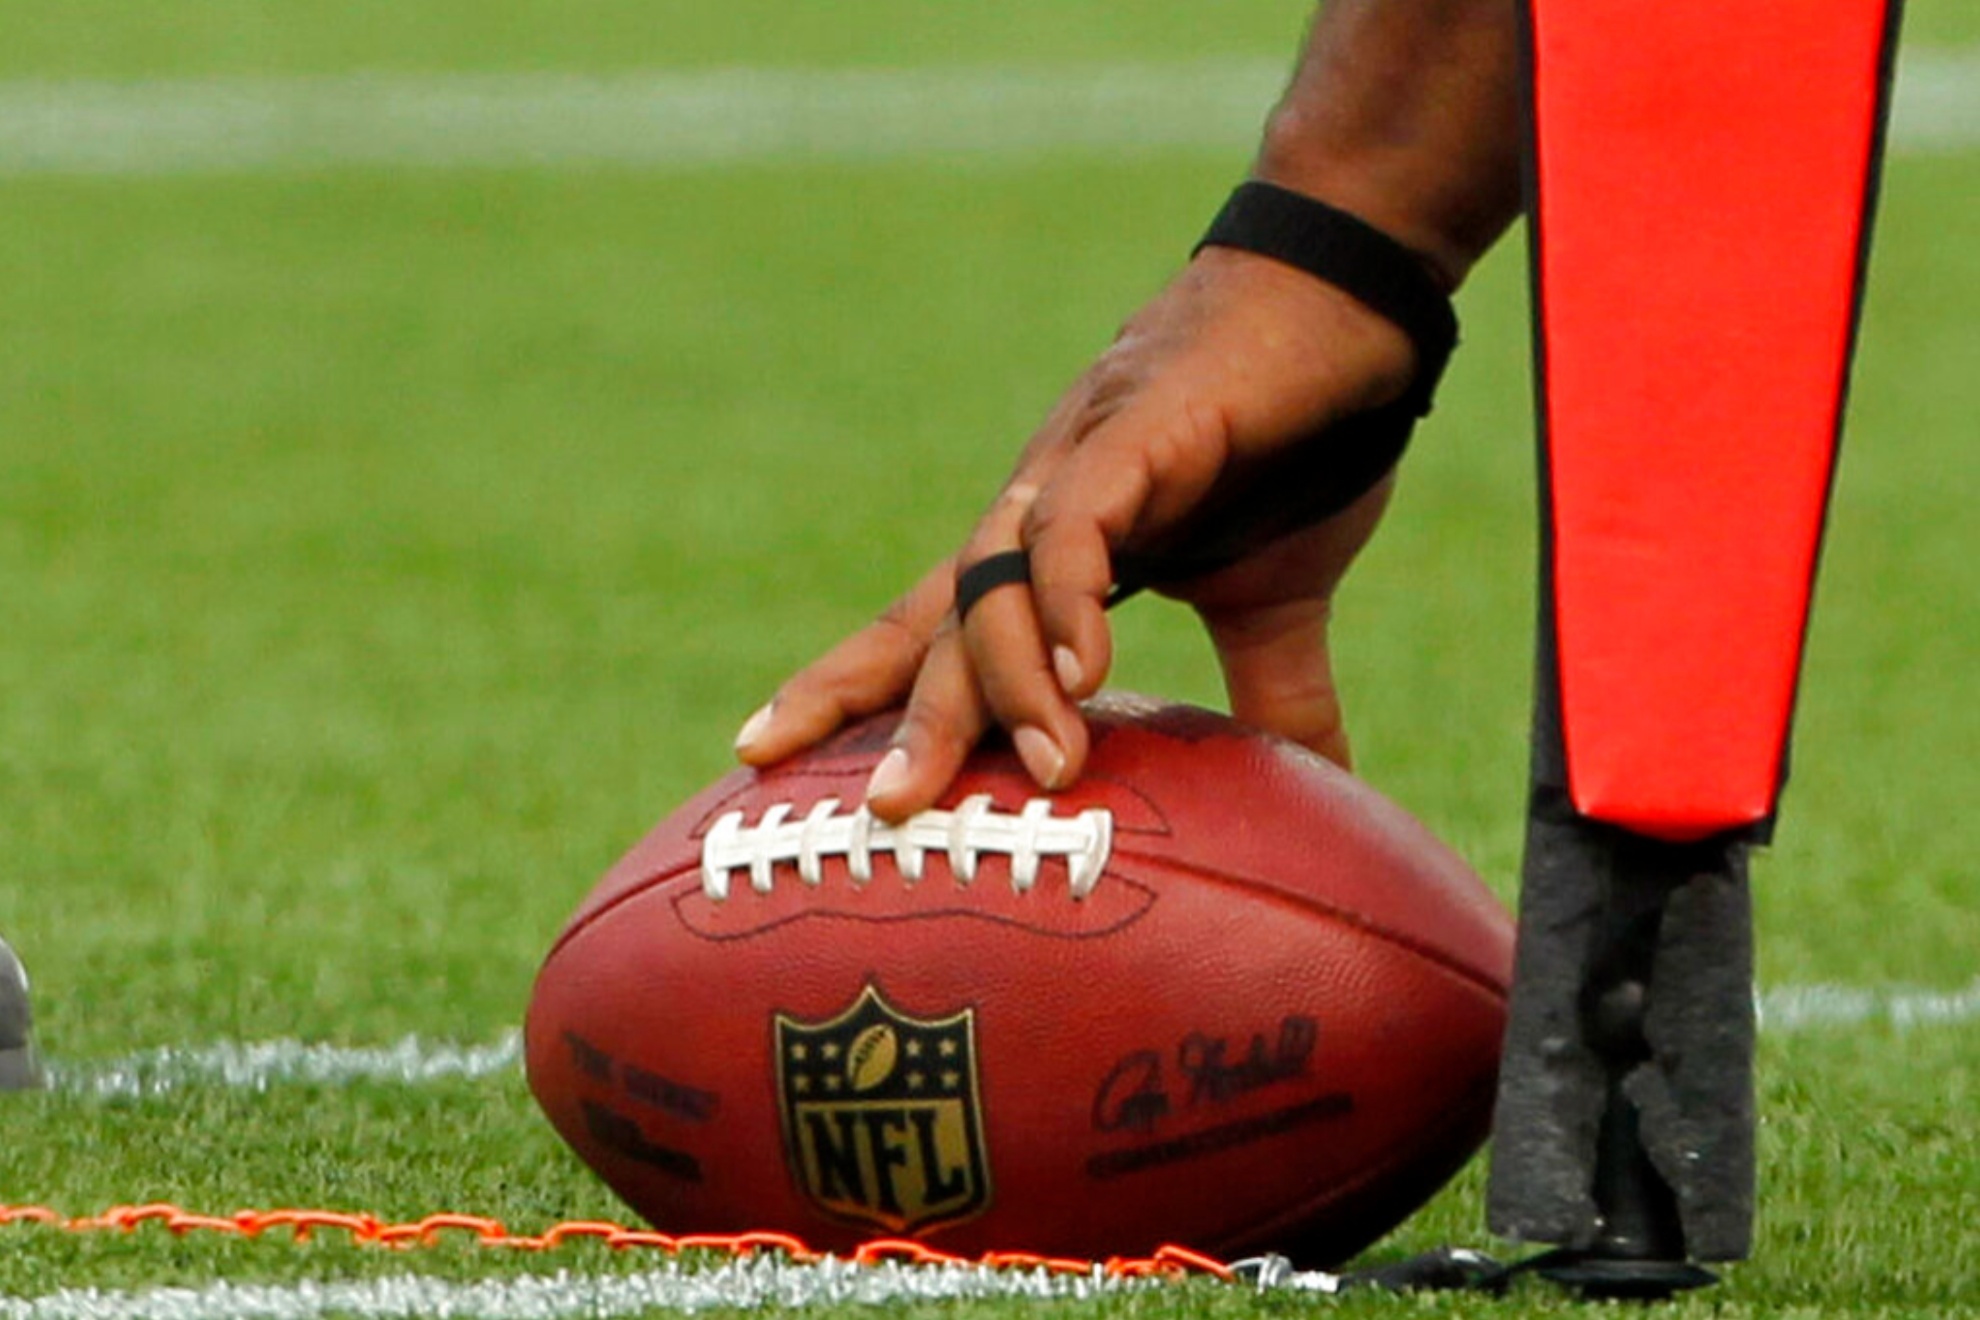 The NFL uses 10-yard chains to measure first downs